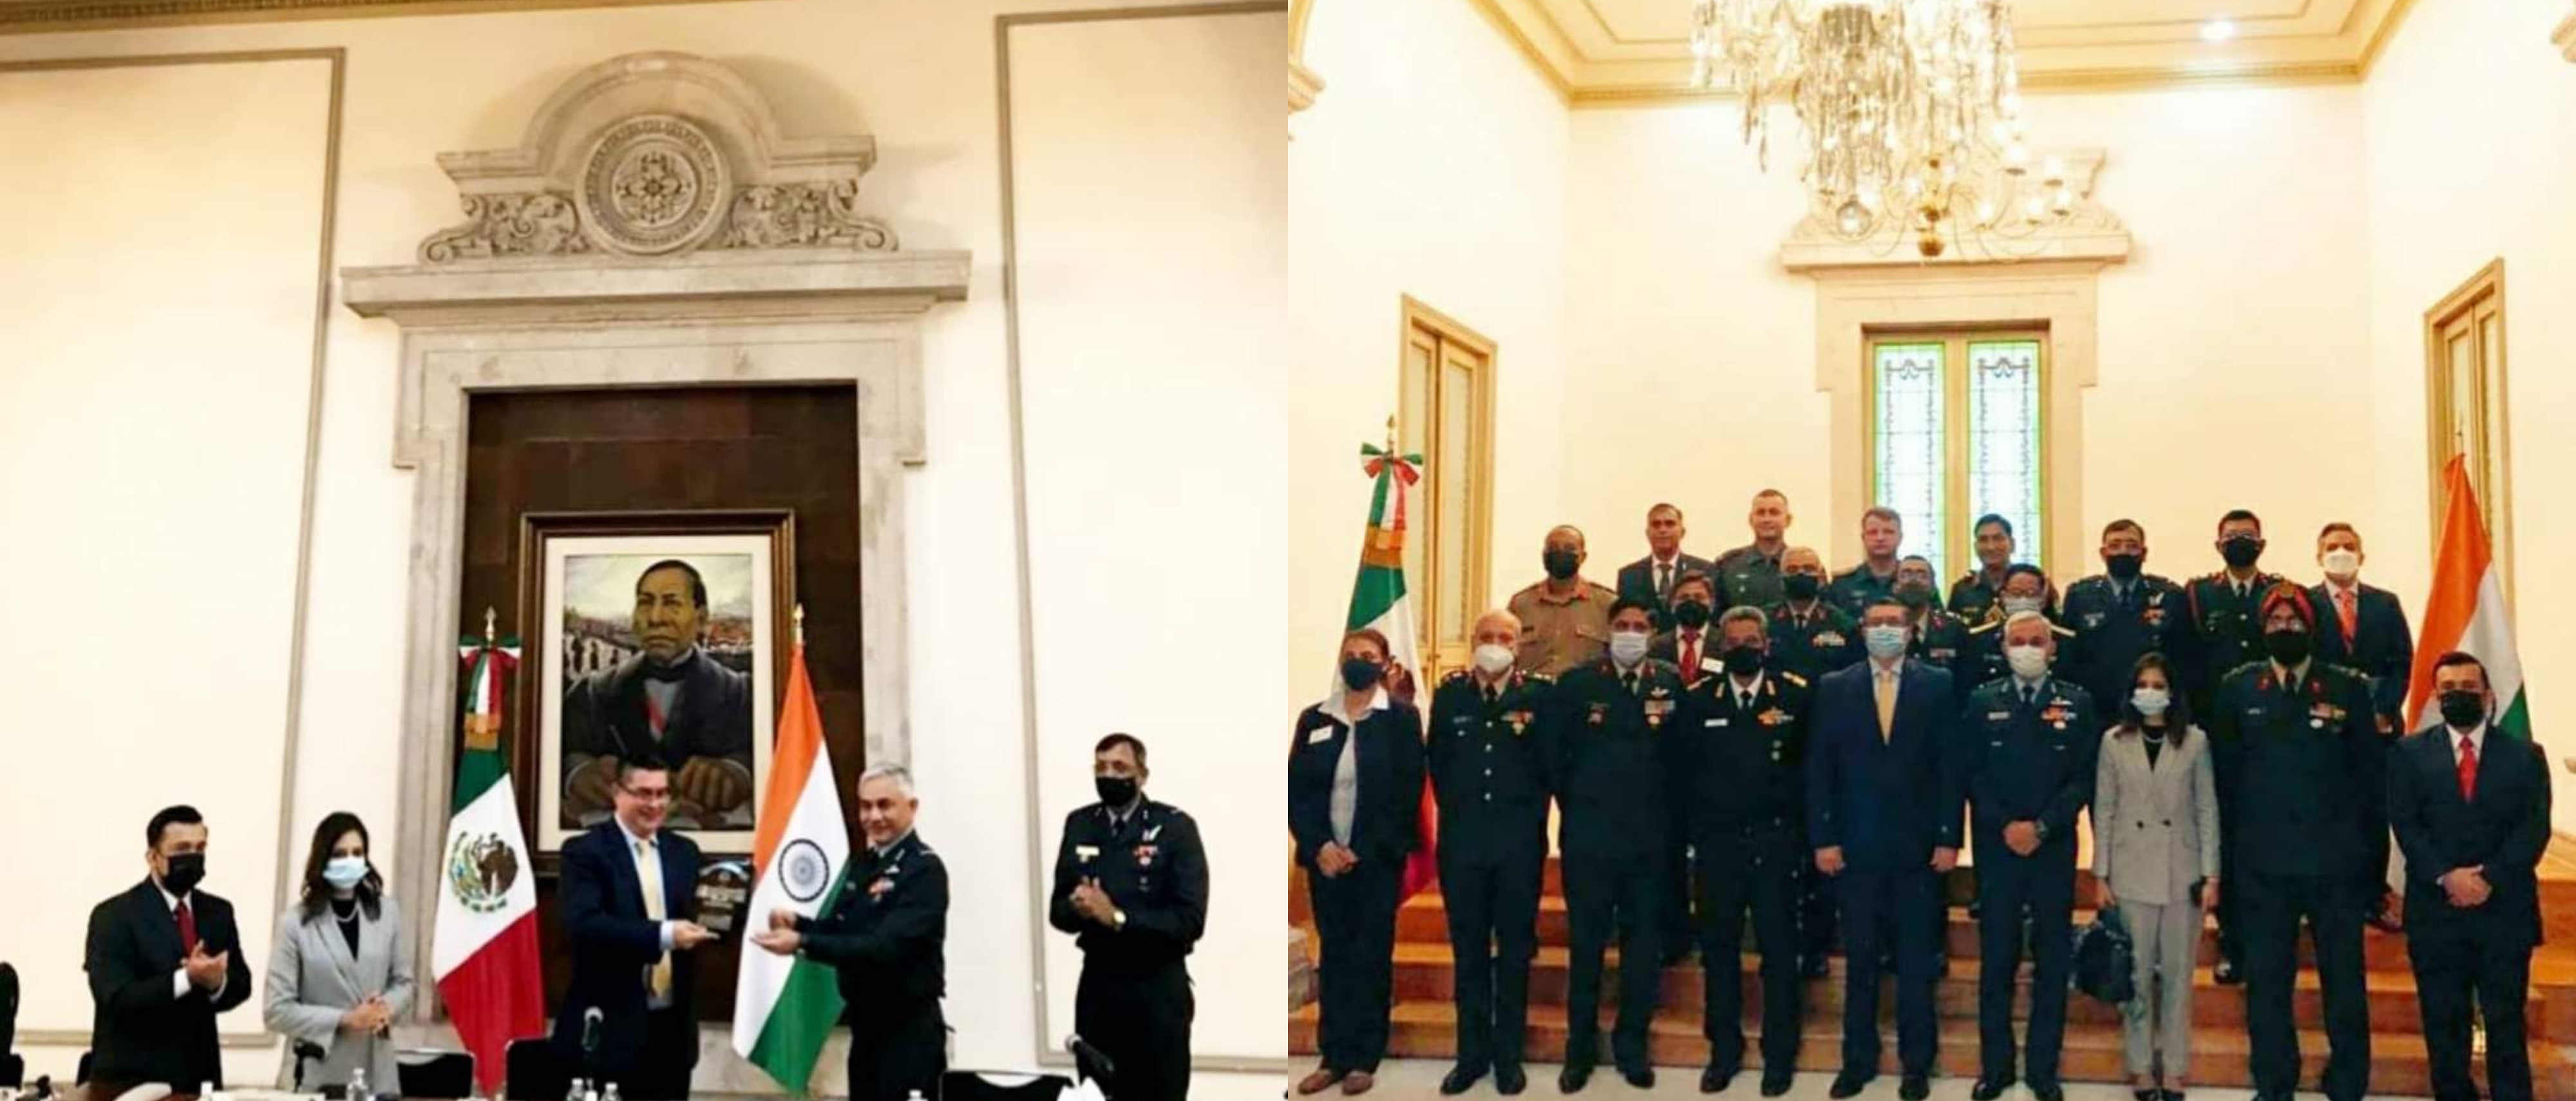  India's National Defense College's delegation visited Mexico's Ministry of Interior.